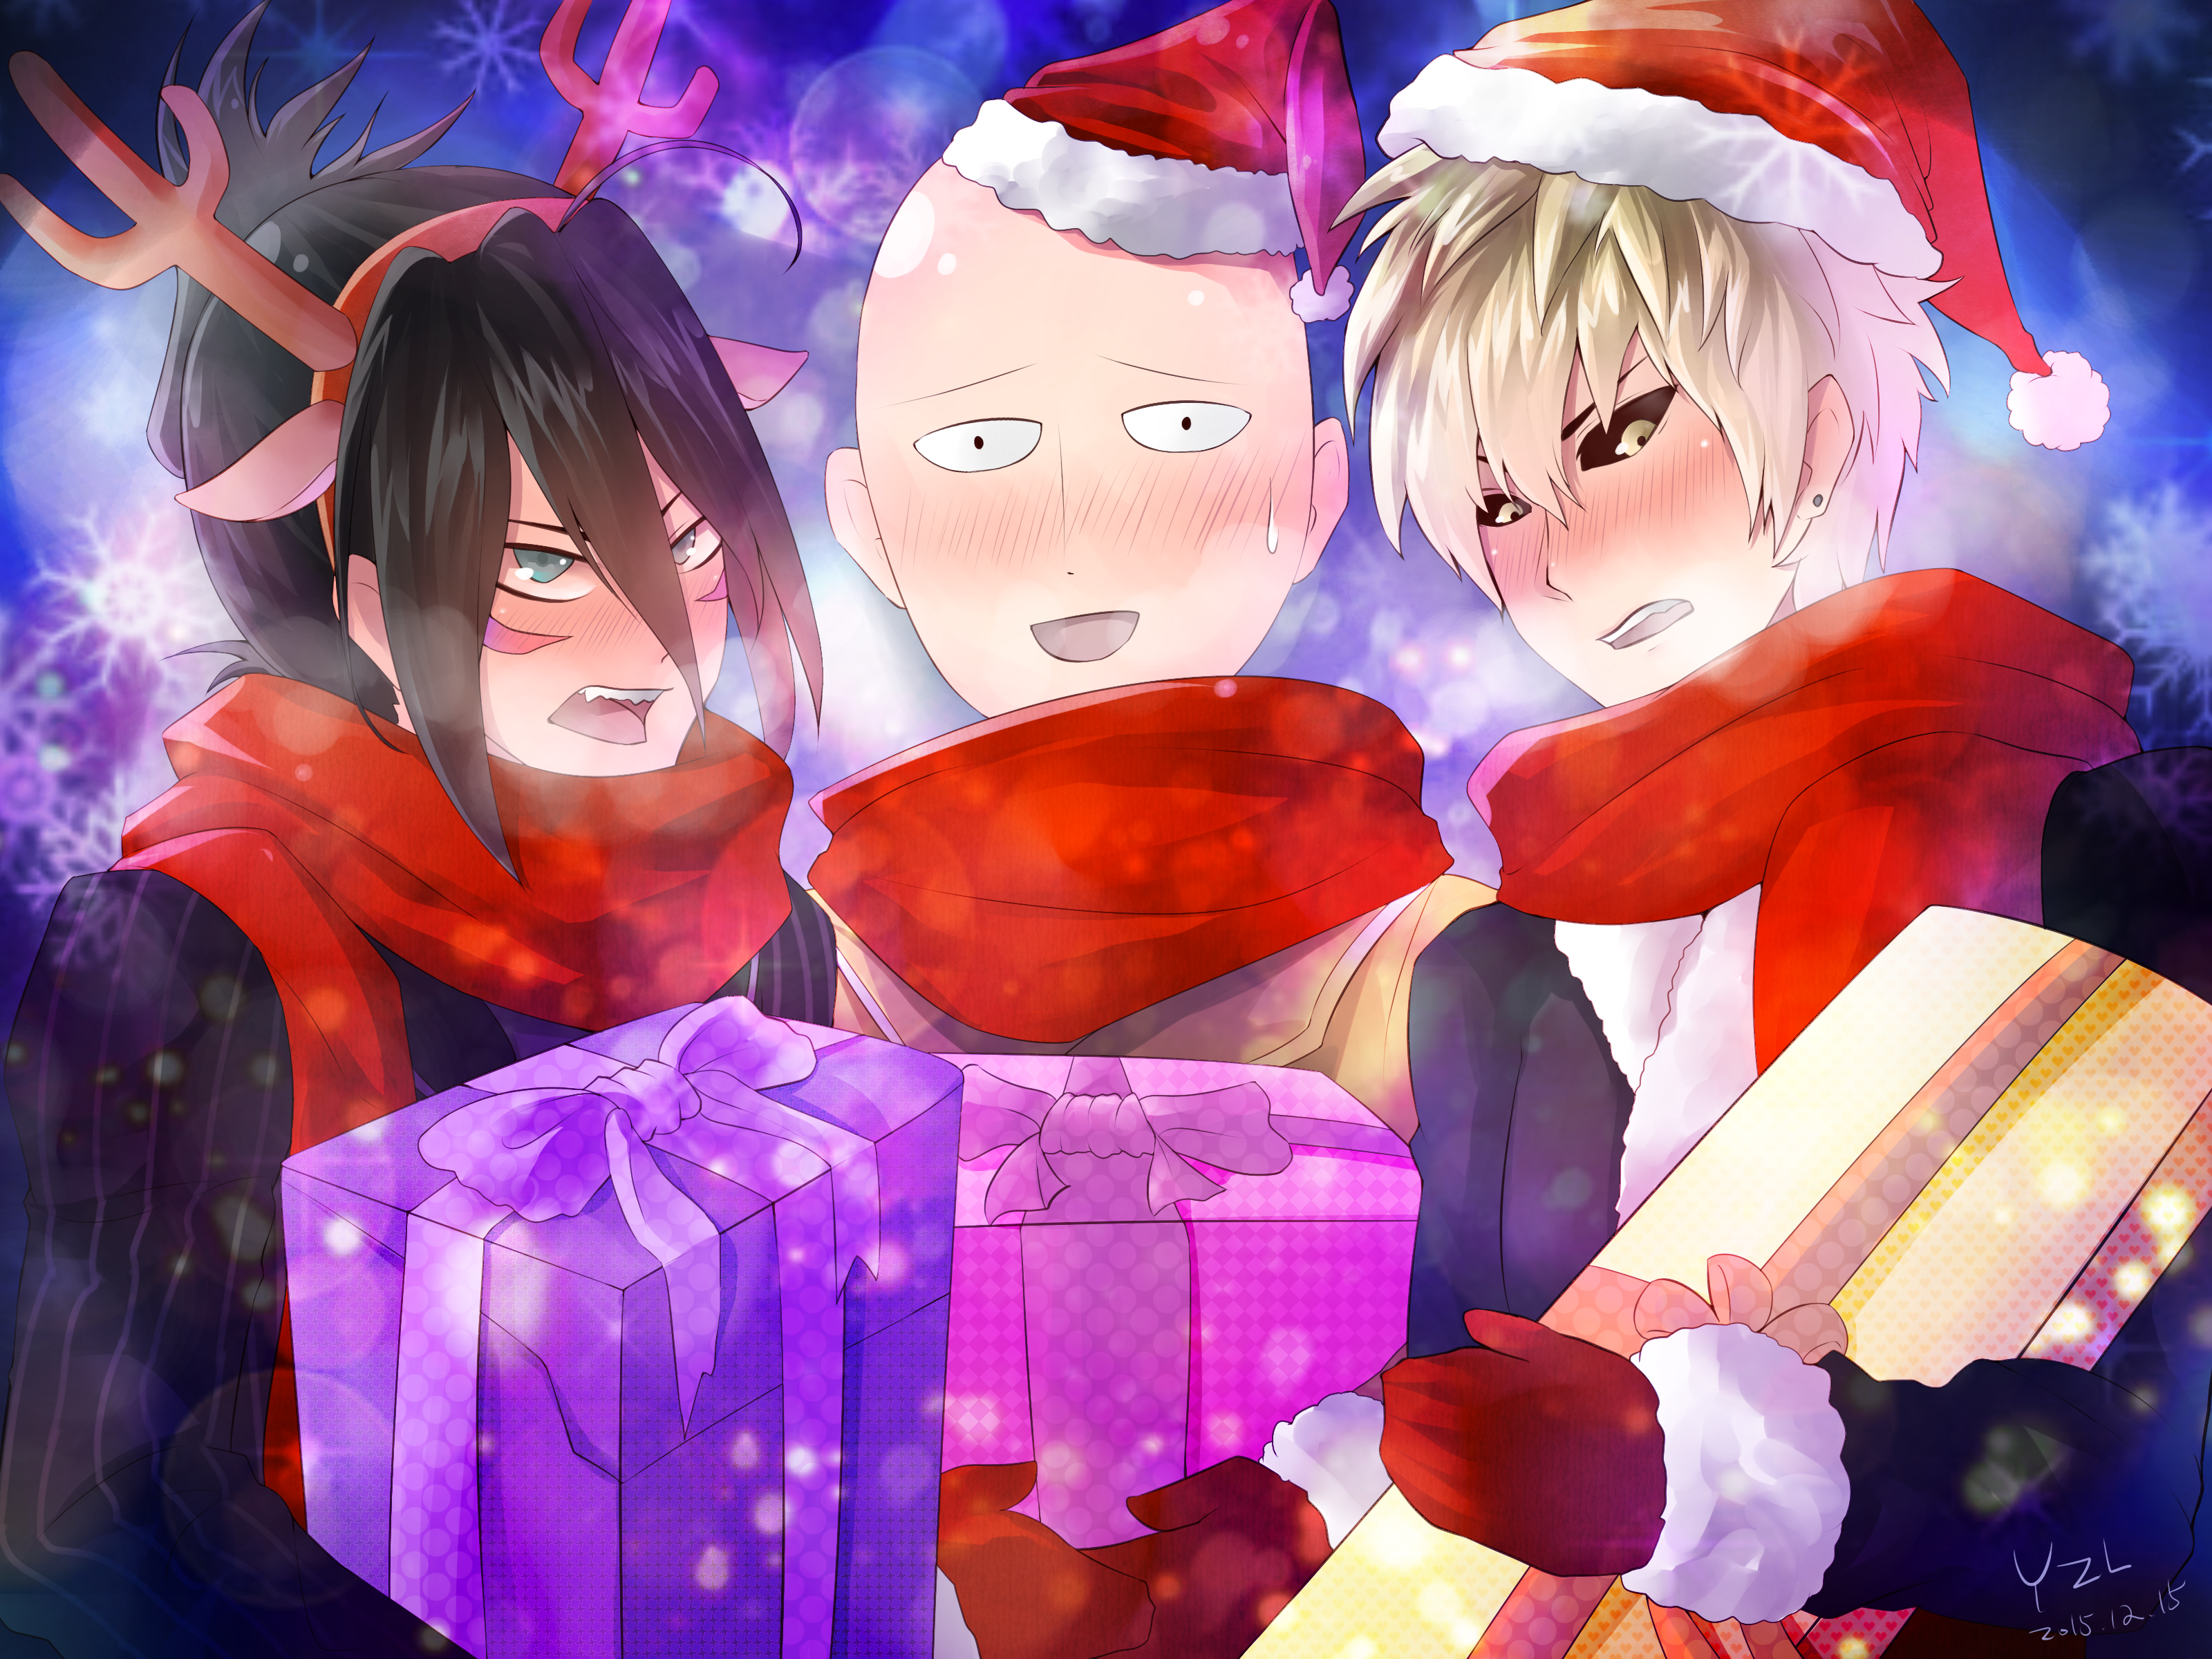 One-Punch Man: Merry Christmas!! by YZL (Pixiv)